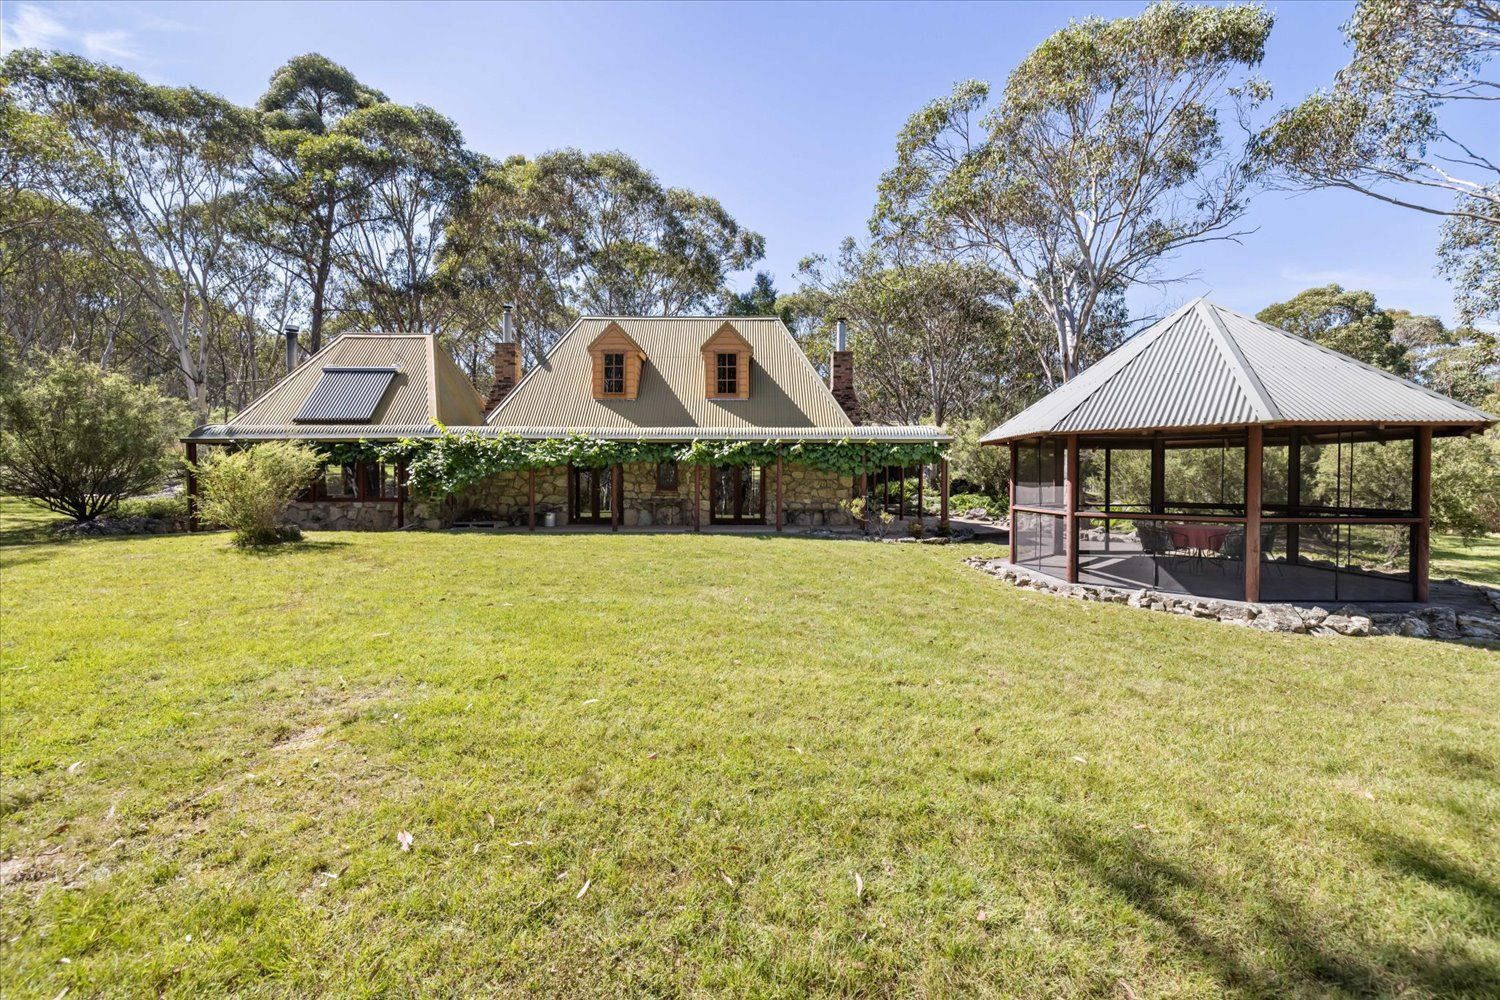 60 Hereford Hall Road, Hereford Hall NSW 2622, Image 1